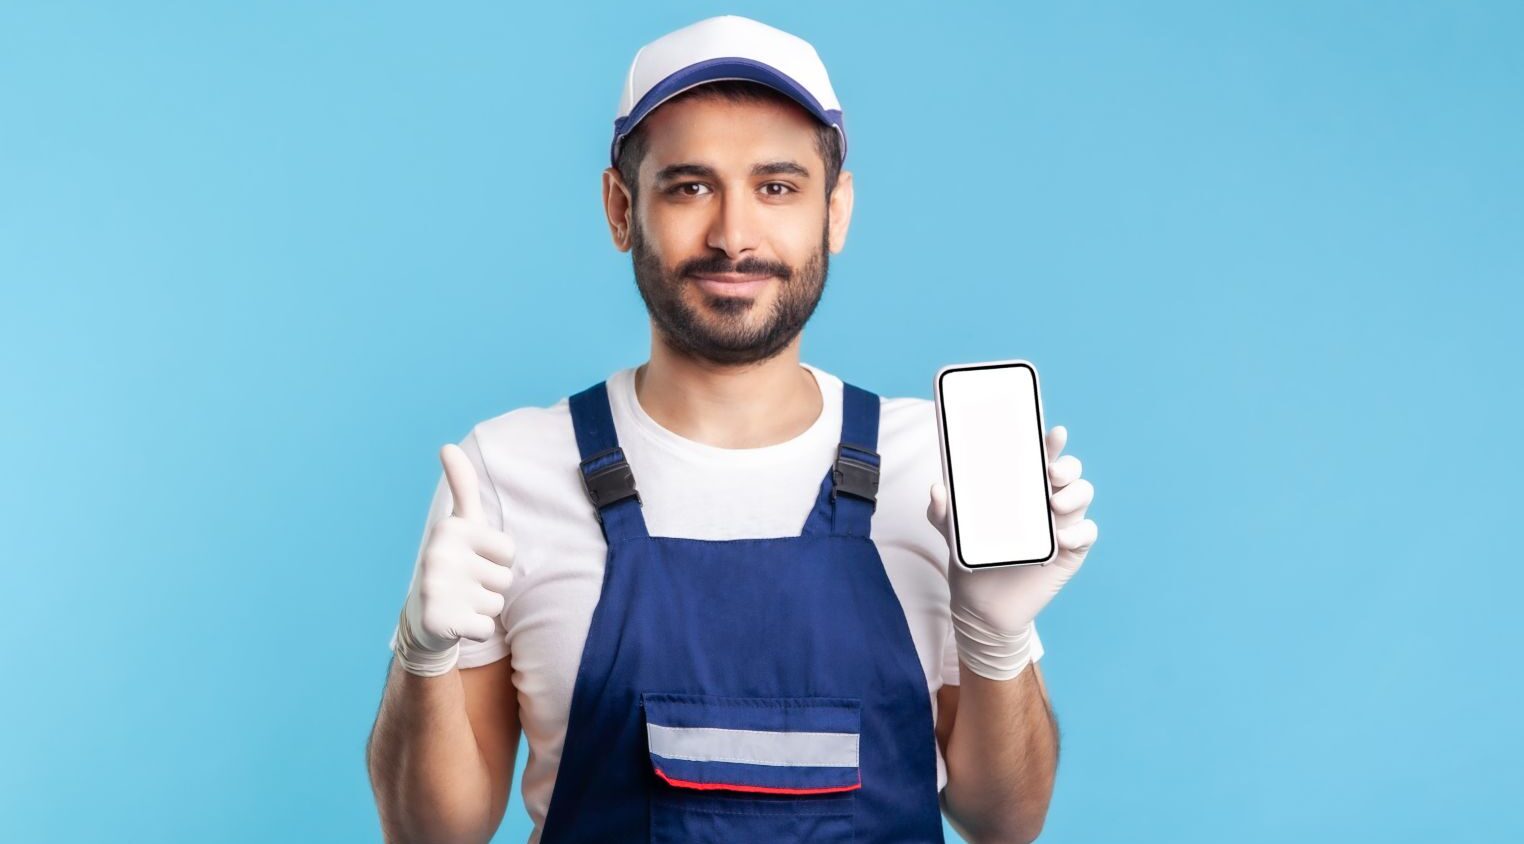 Plumber With A Mobile Phone